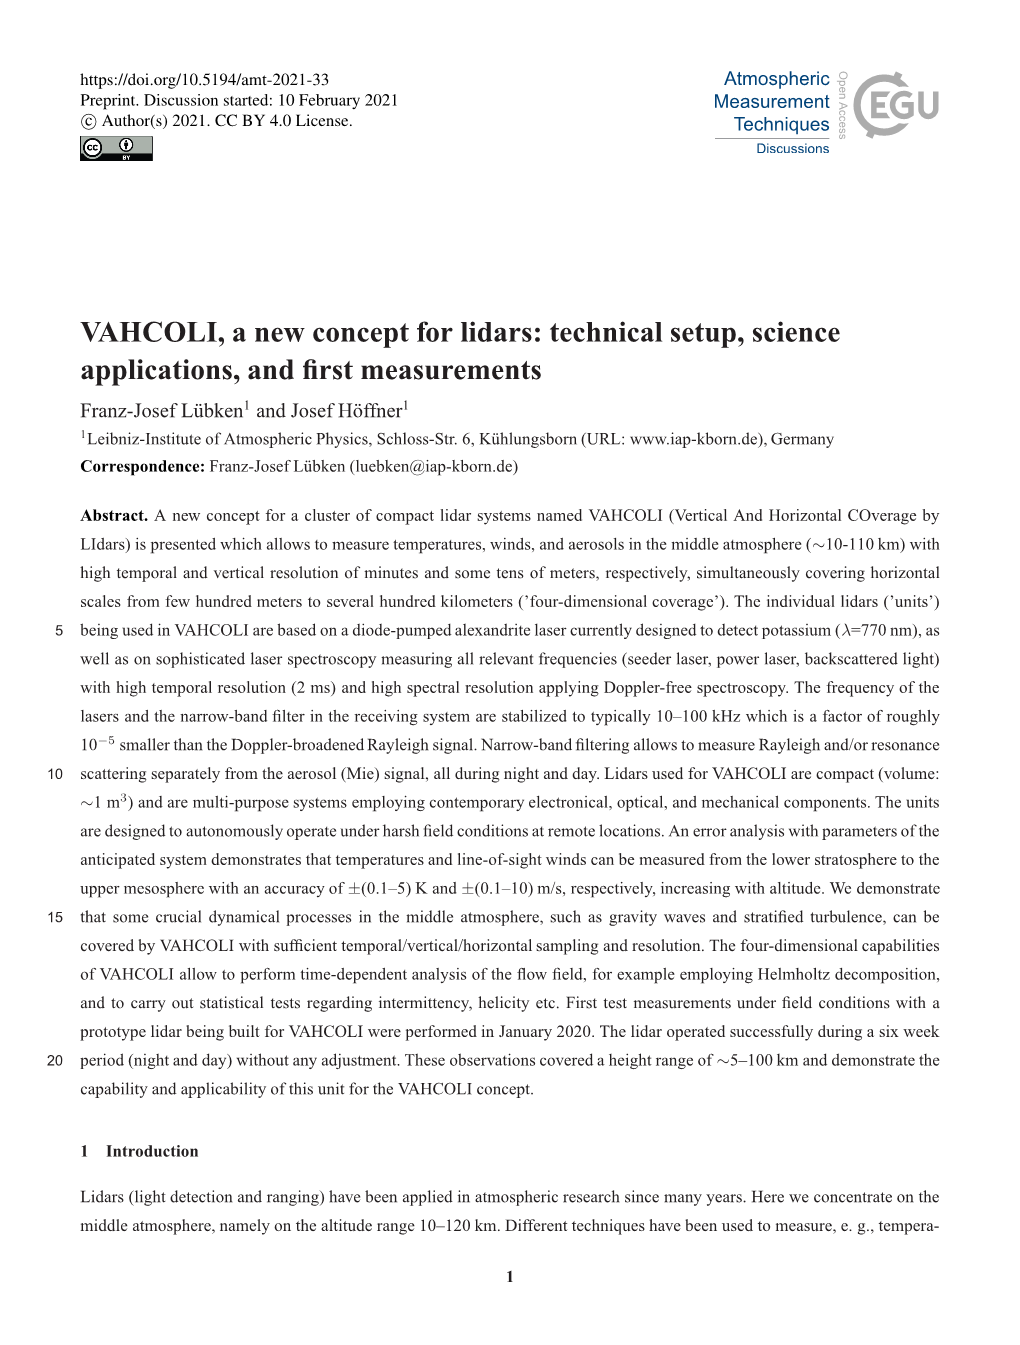 VAHCOLI, a New Concept for Lidars: Technical Setup, Science